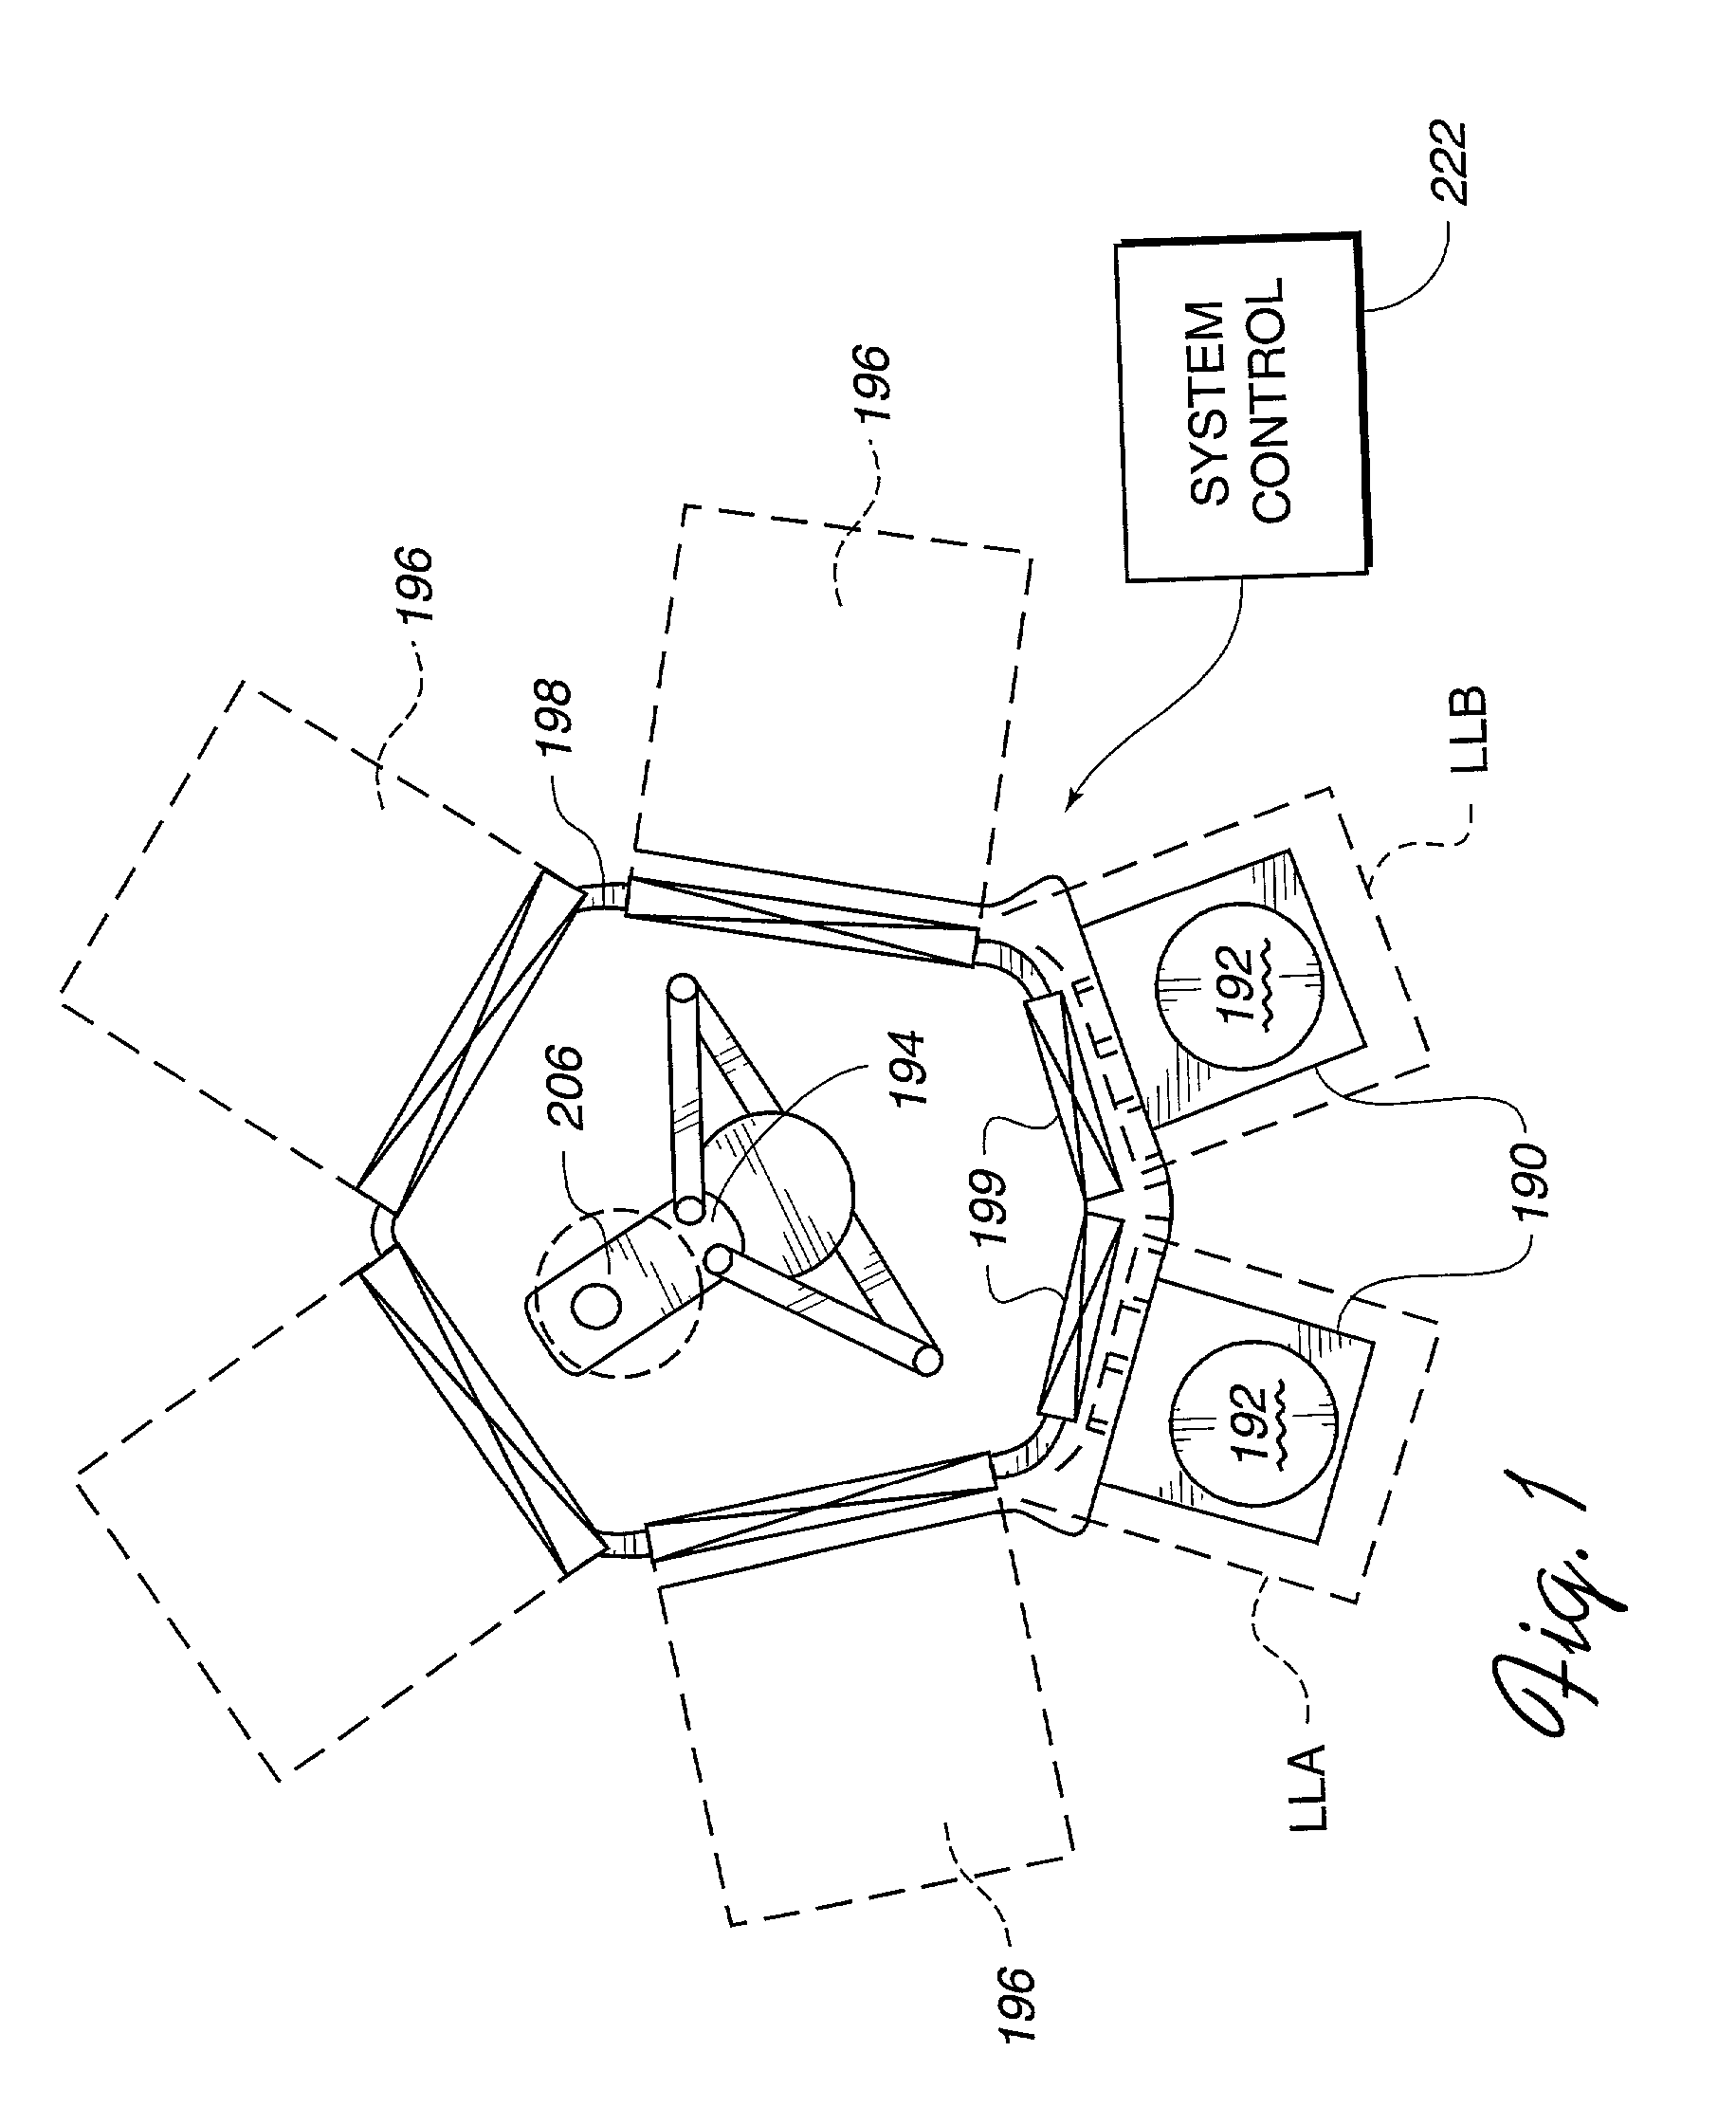 Method and apparatus for alignment of automated workpiece handling systems